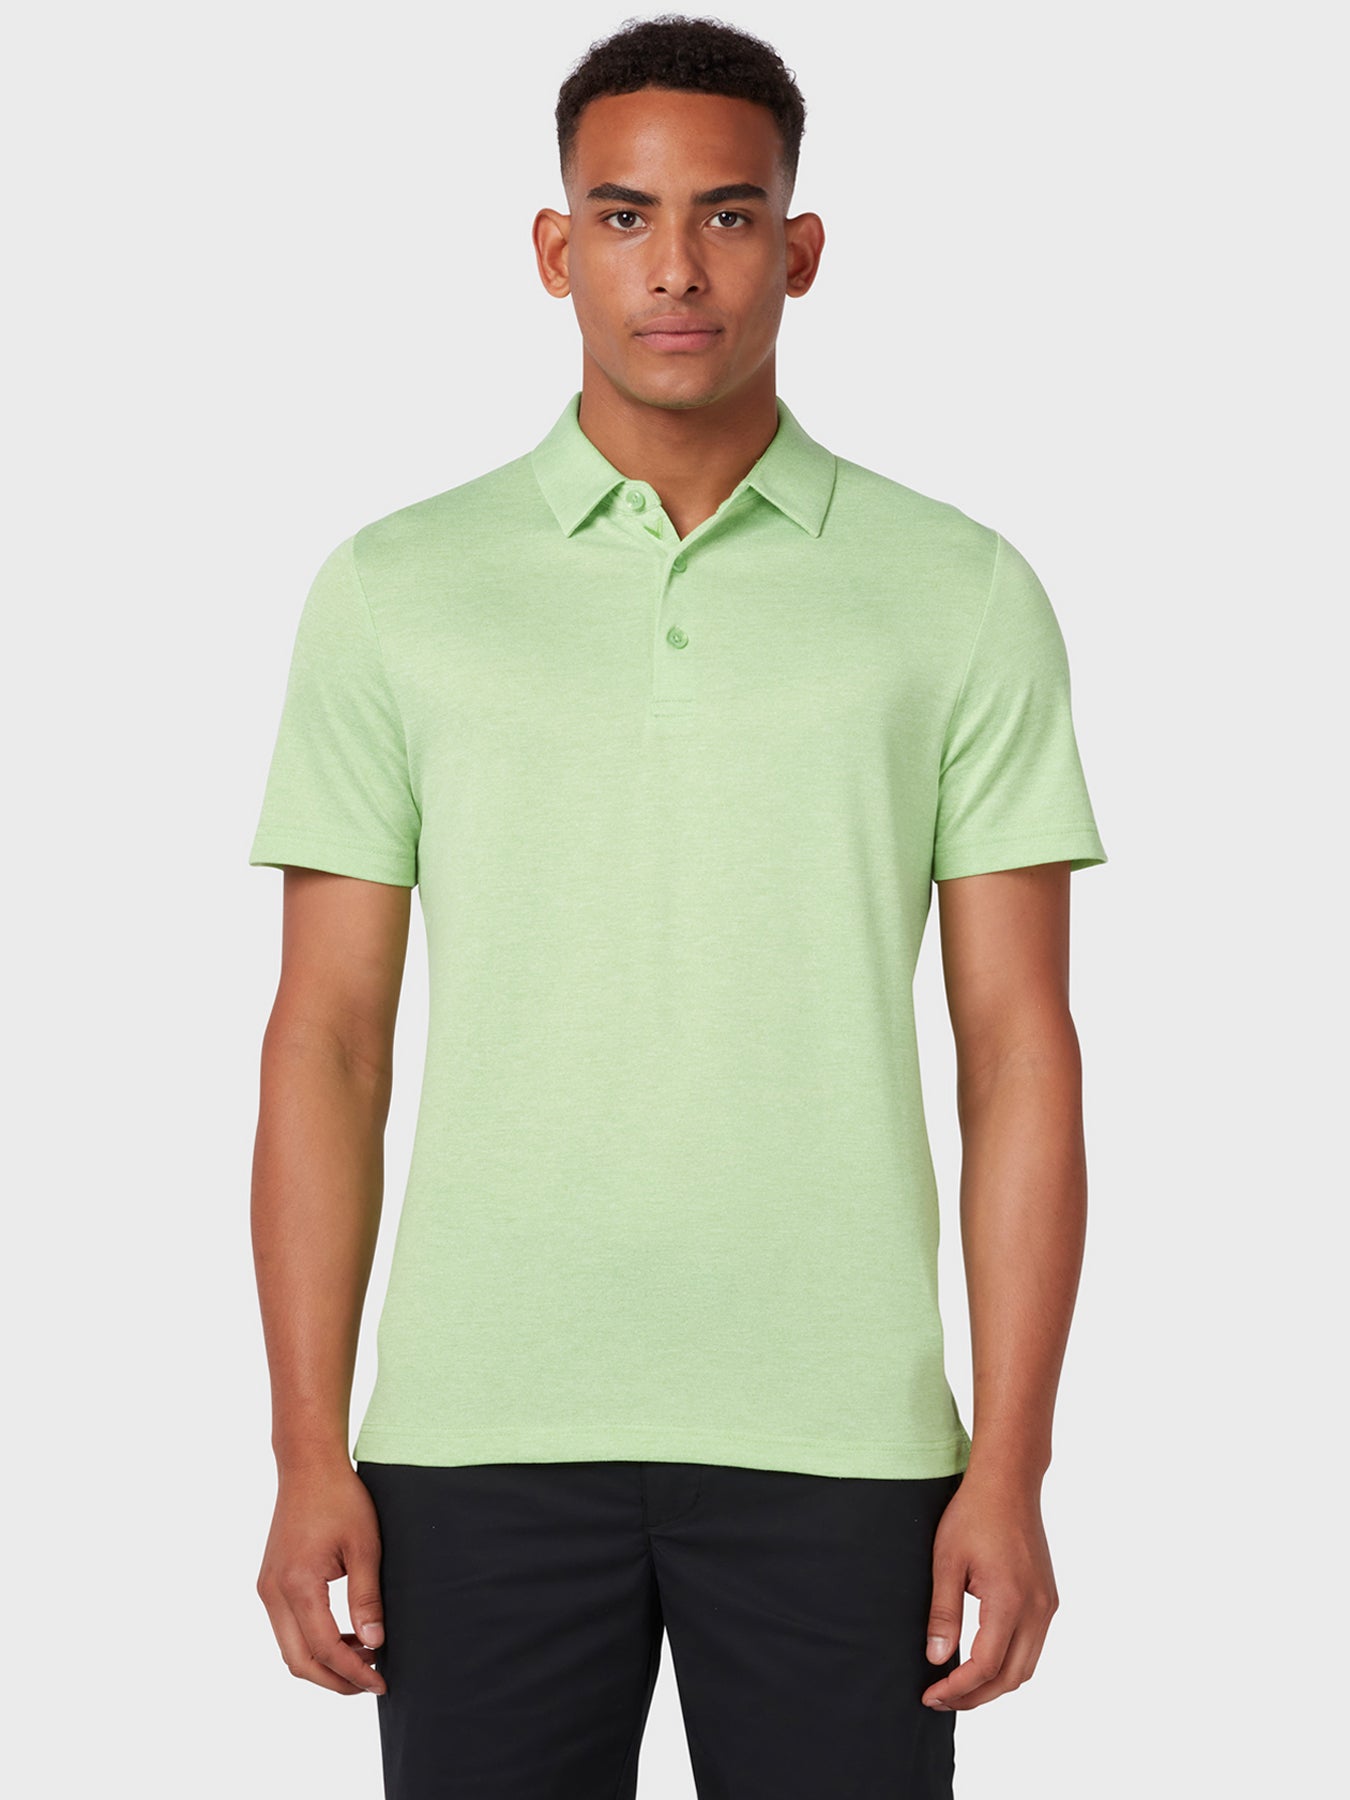 View Soft Touch Solid Polo In Summer Green Summer Green Htr S information